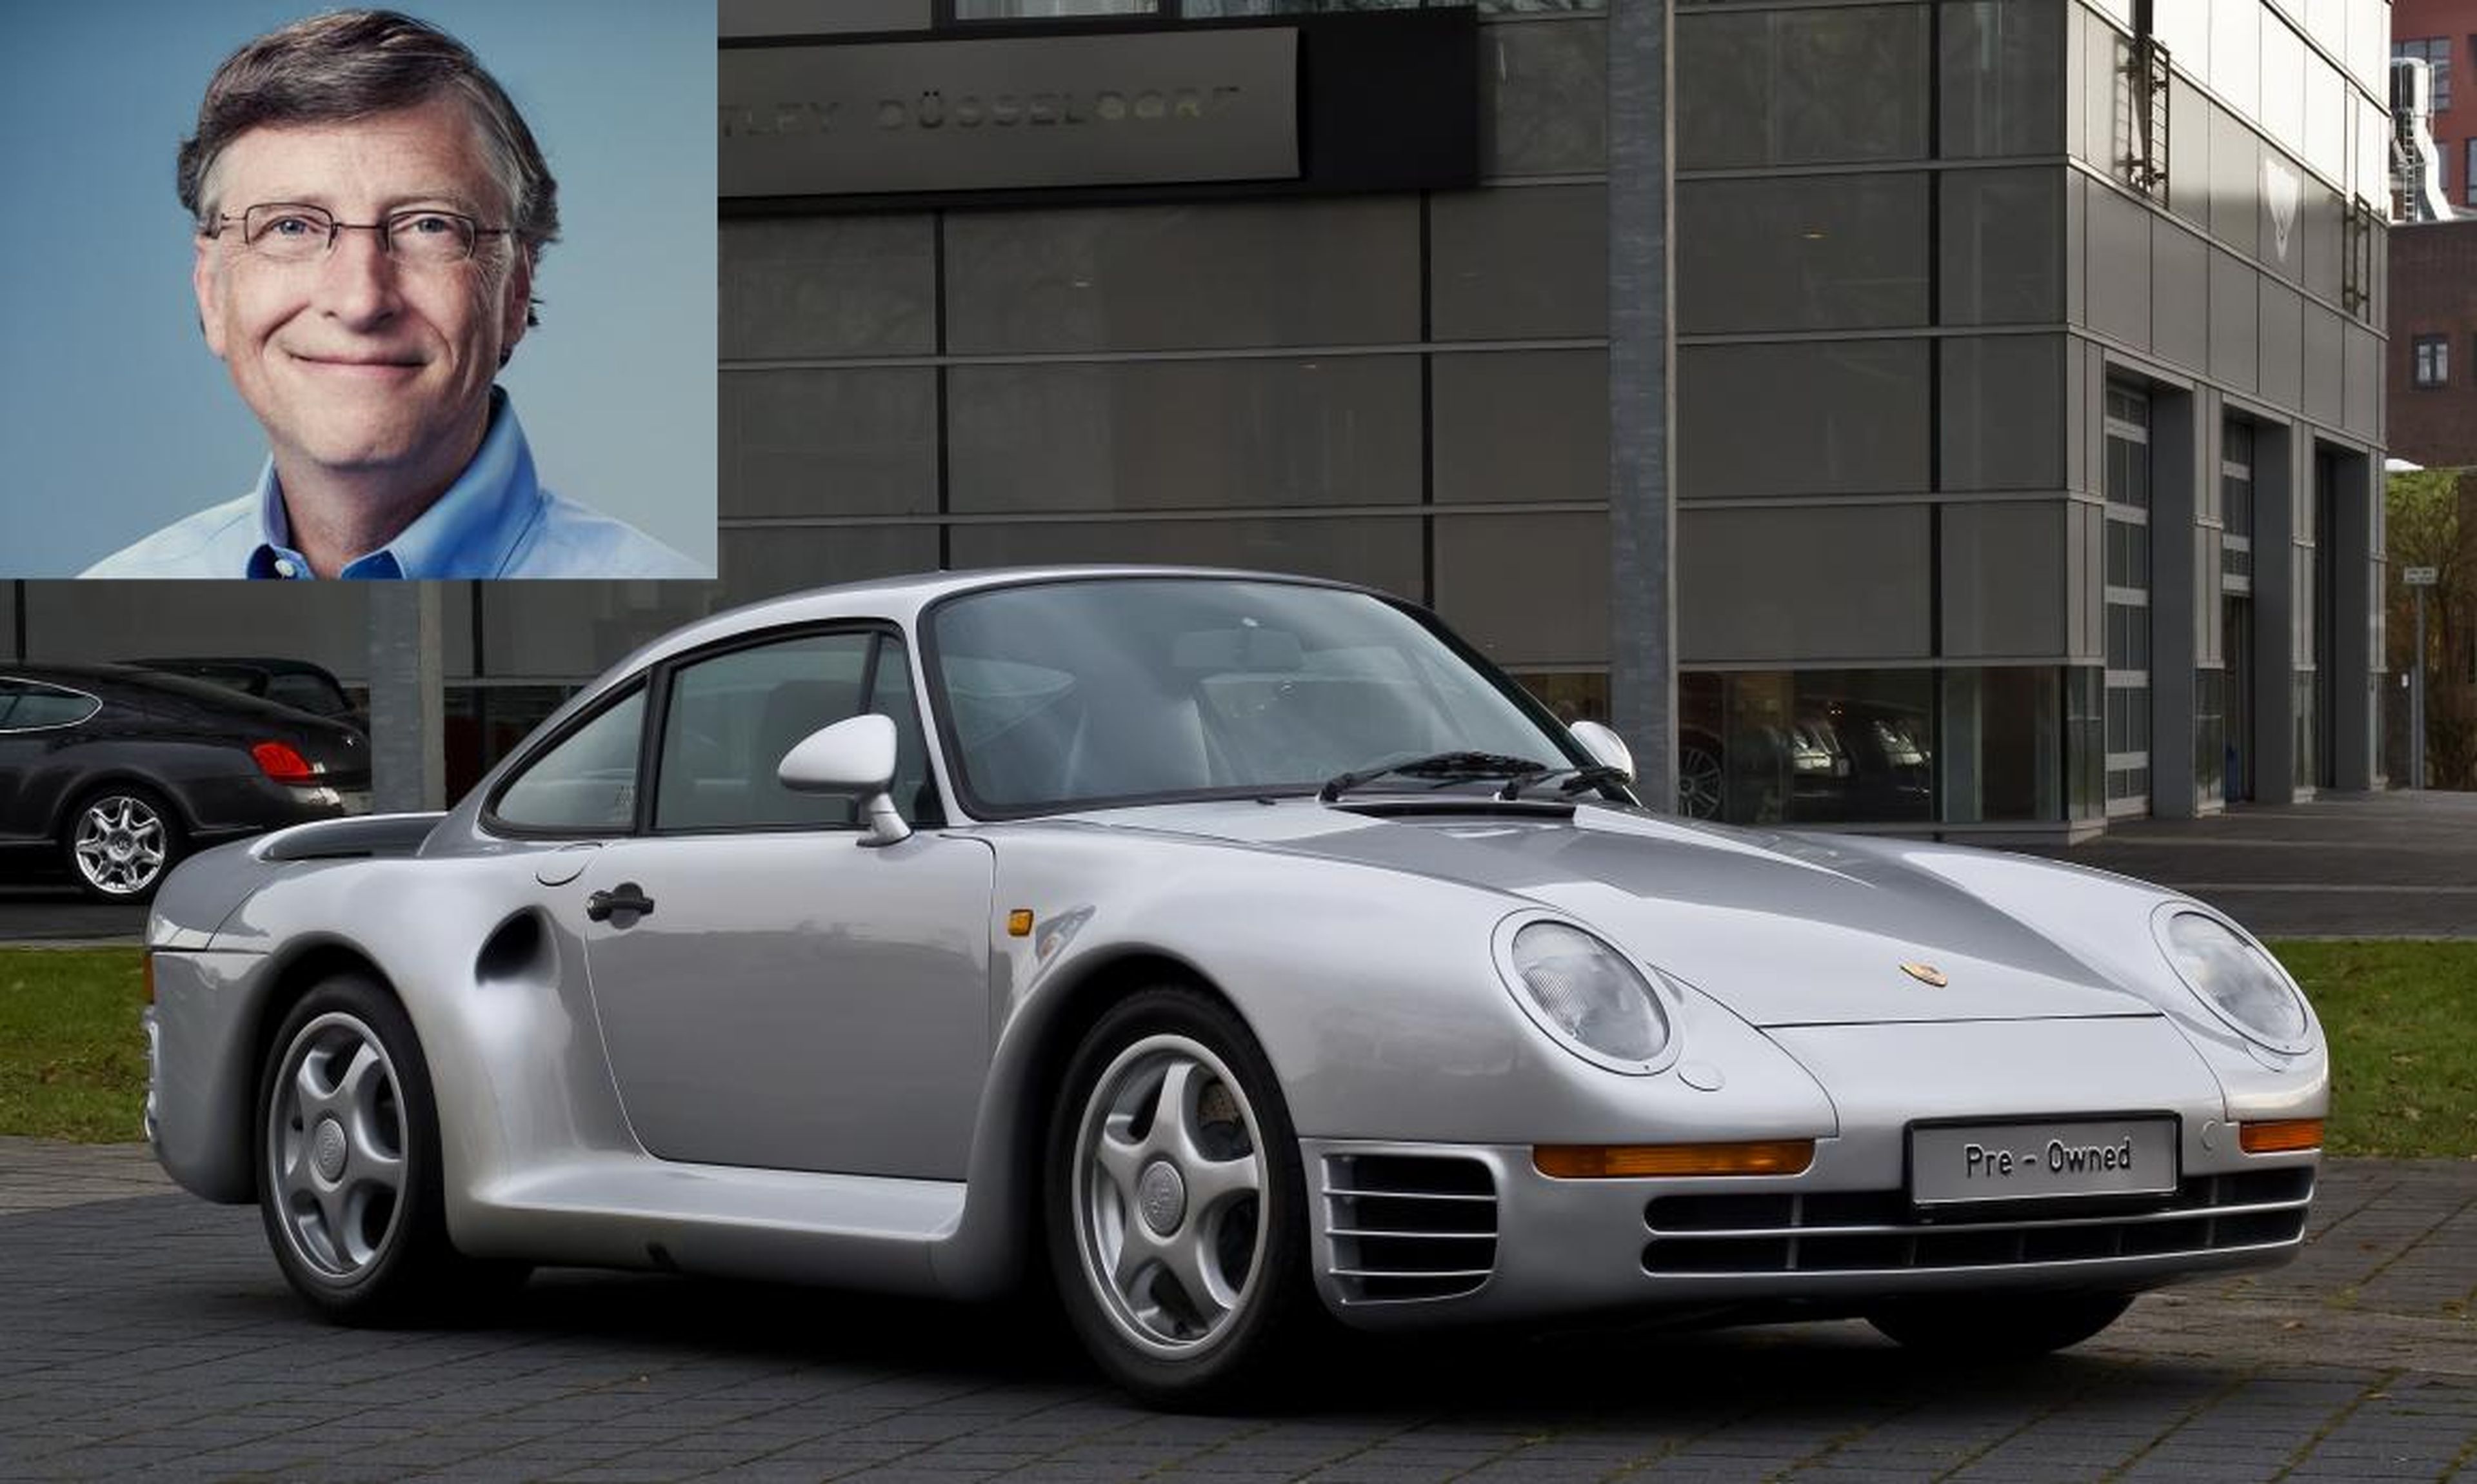 8. Speaking of cars, Gates has quite the Porsche collection. The headliner is his Porsche 959 sports car, which he bought 13 years before the car was approved by the US Environmental Protection Agency or the US Department of